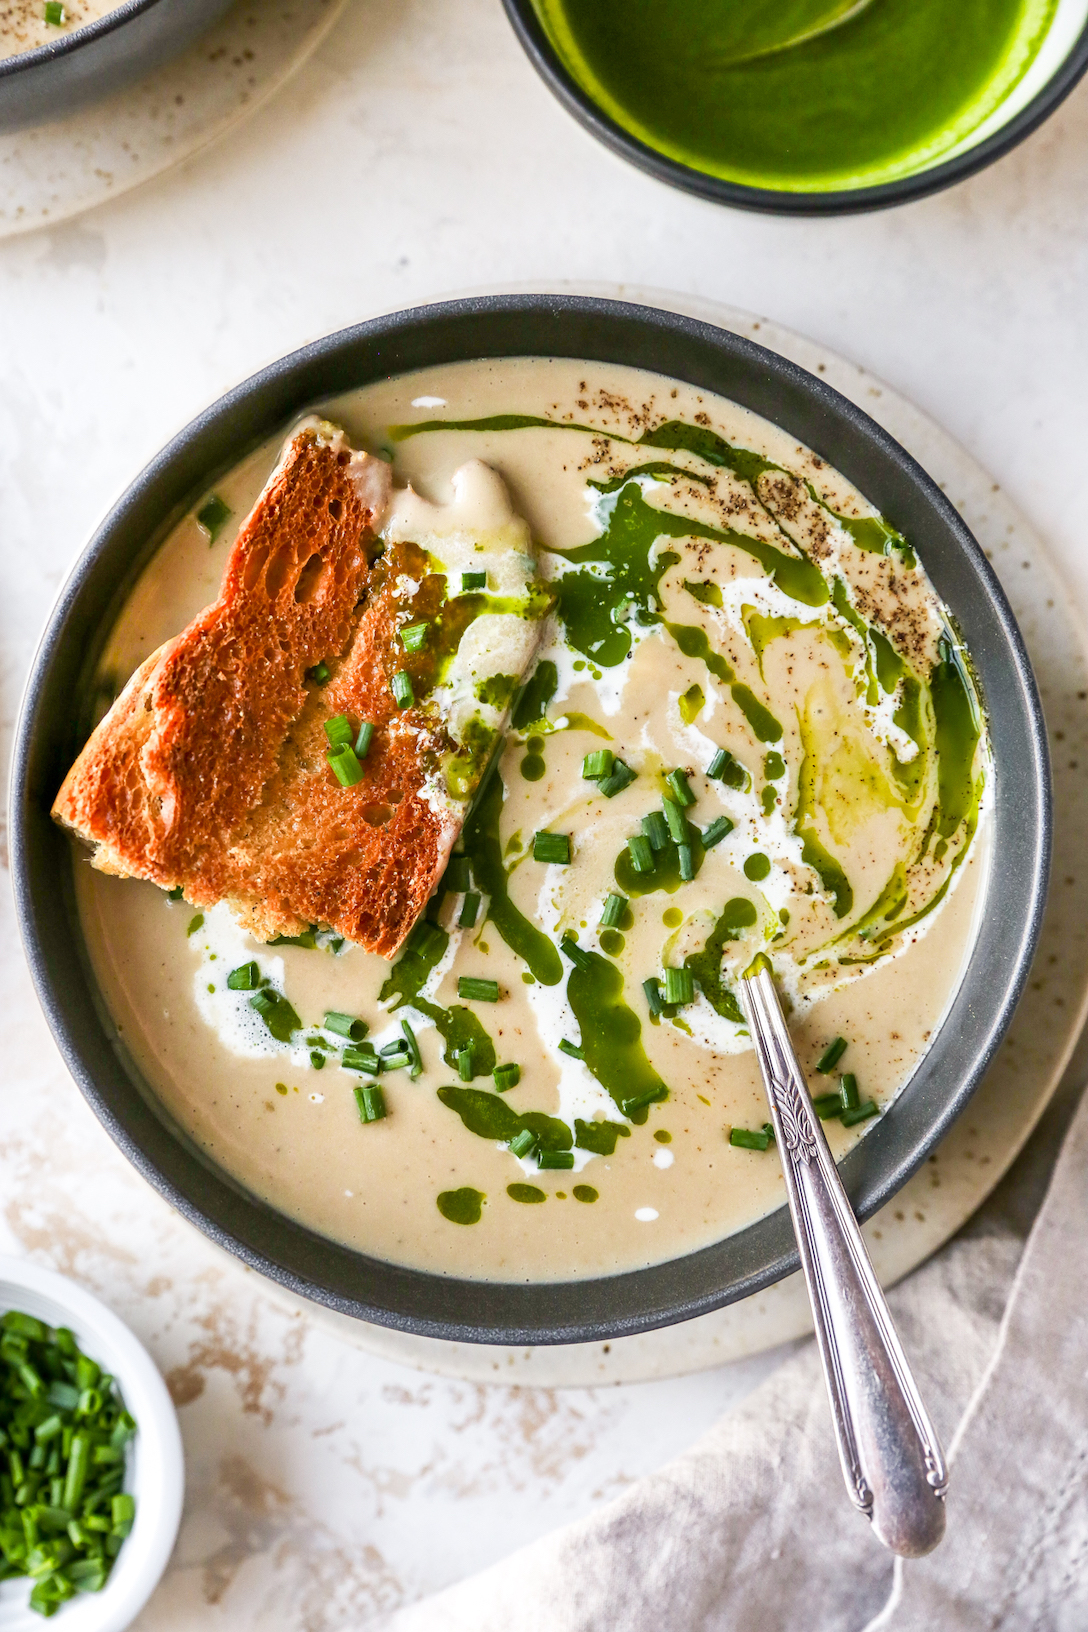 Roasted Garlic & White Bean Soup with Herb Oil - Yes to Yolks